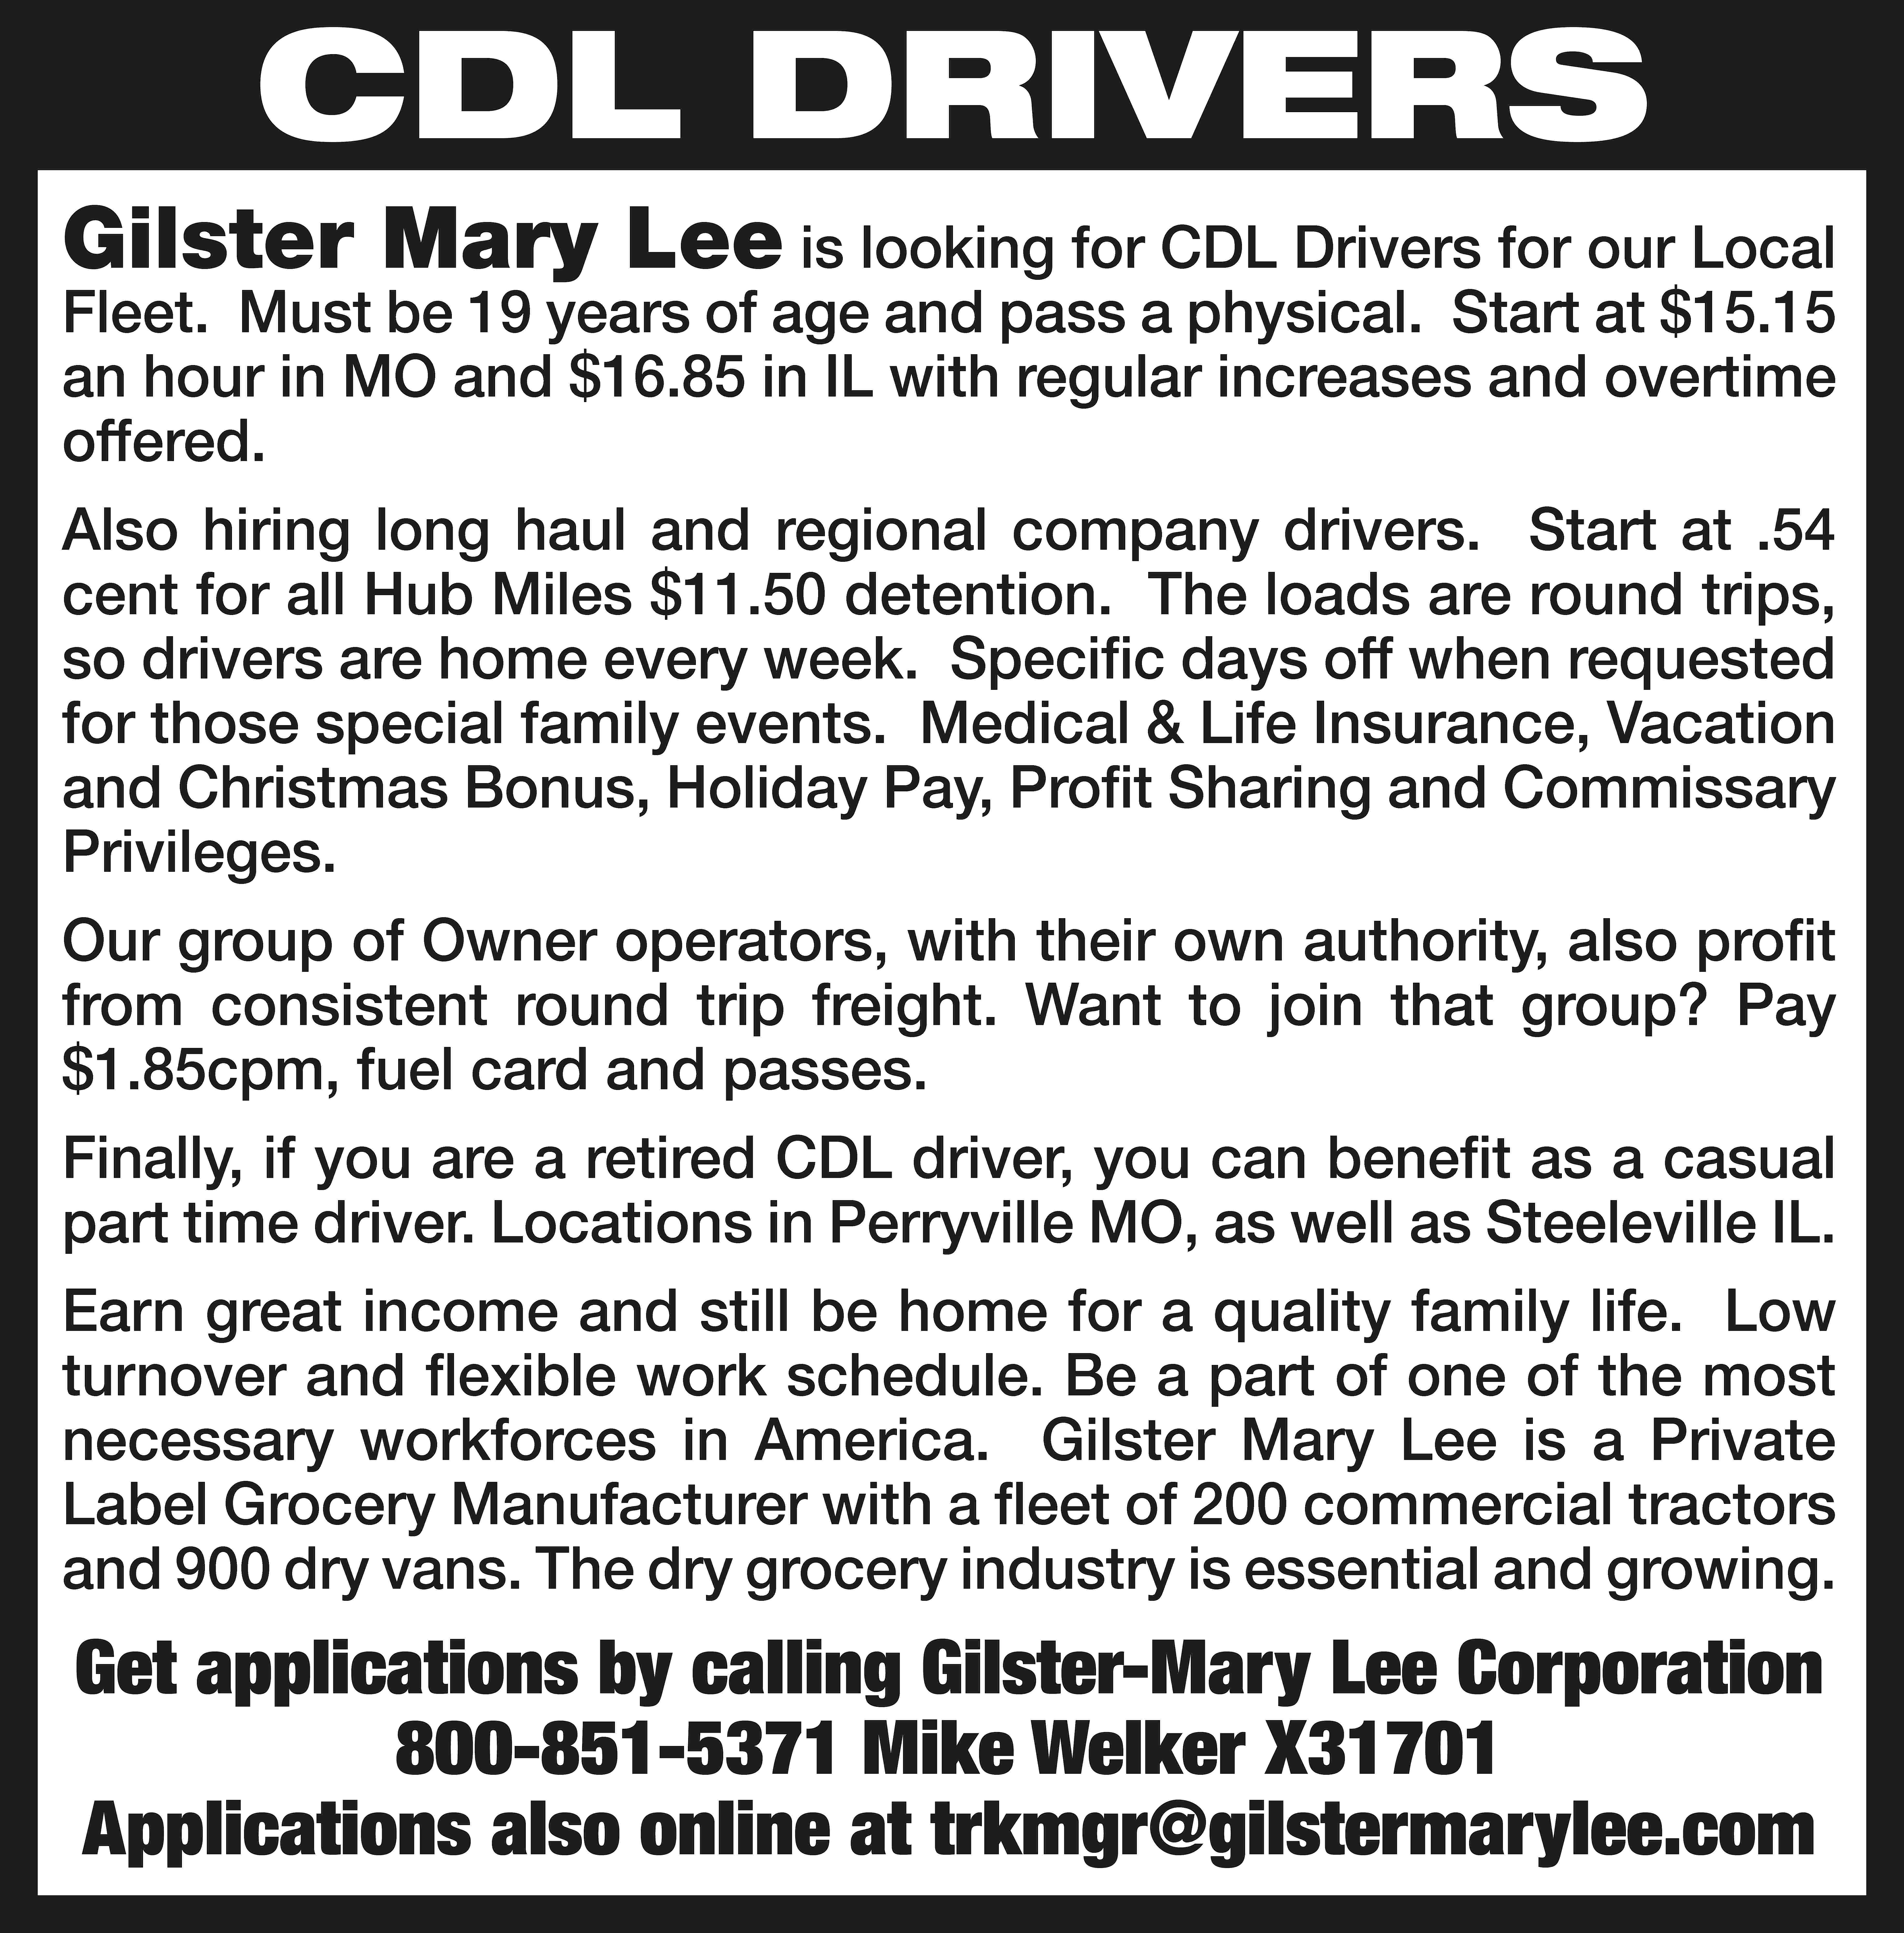 CDL DRIVERS Gilster Mary Lee  CDL DRIVERS Gilster Mary Lee is looking for CDL Drivers for our Local Fleet. Must be 19 years of age and pass a physical. Start at $15.15 an hour in MO and $16.85 in IL with regular increases and overtime offered. Also hiring long haul and regional company drivers. Start at .54 cent for all Hub Miles $11.50 detention. The loads are round trips, so drivers are home every week. Specific days off when requested for those special family events. Medical & Life Insurance, Vacation and Christmas Bonus, Holiday Pay, Profit Sharing and Commissary Privileges. Our group of Owner operators, with their own authority, also profit from consistent round trip freight. Want to join that group? Pay $1.85cpm, fuel card and passes. Finally, if you are a retired CDL driver, you can benefit as a casual part time driver. Locations in Perryville MO, as well as Steeleville IL. Earn great income and still be home for a quality family life. Low turnover and flexible work schedule. Be a part of one of the most necessary workforces in America. Gilster Mary Lee is a Private Label Grocery Manufacturer with a fleet of 200 commercial tractors and 900 dry vans. The dry grocery industry is essential and growing. Get applications by calling Gilster-Mary Lee Corporation 800-851-5371 Mike Welker X31701 Applications also online at trkmgr@gilstermarylee.com